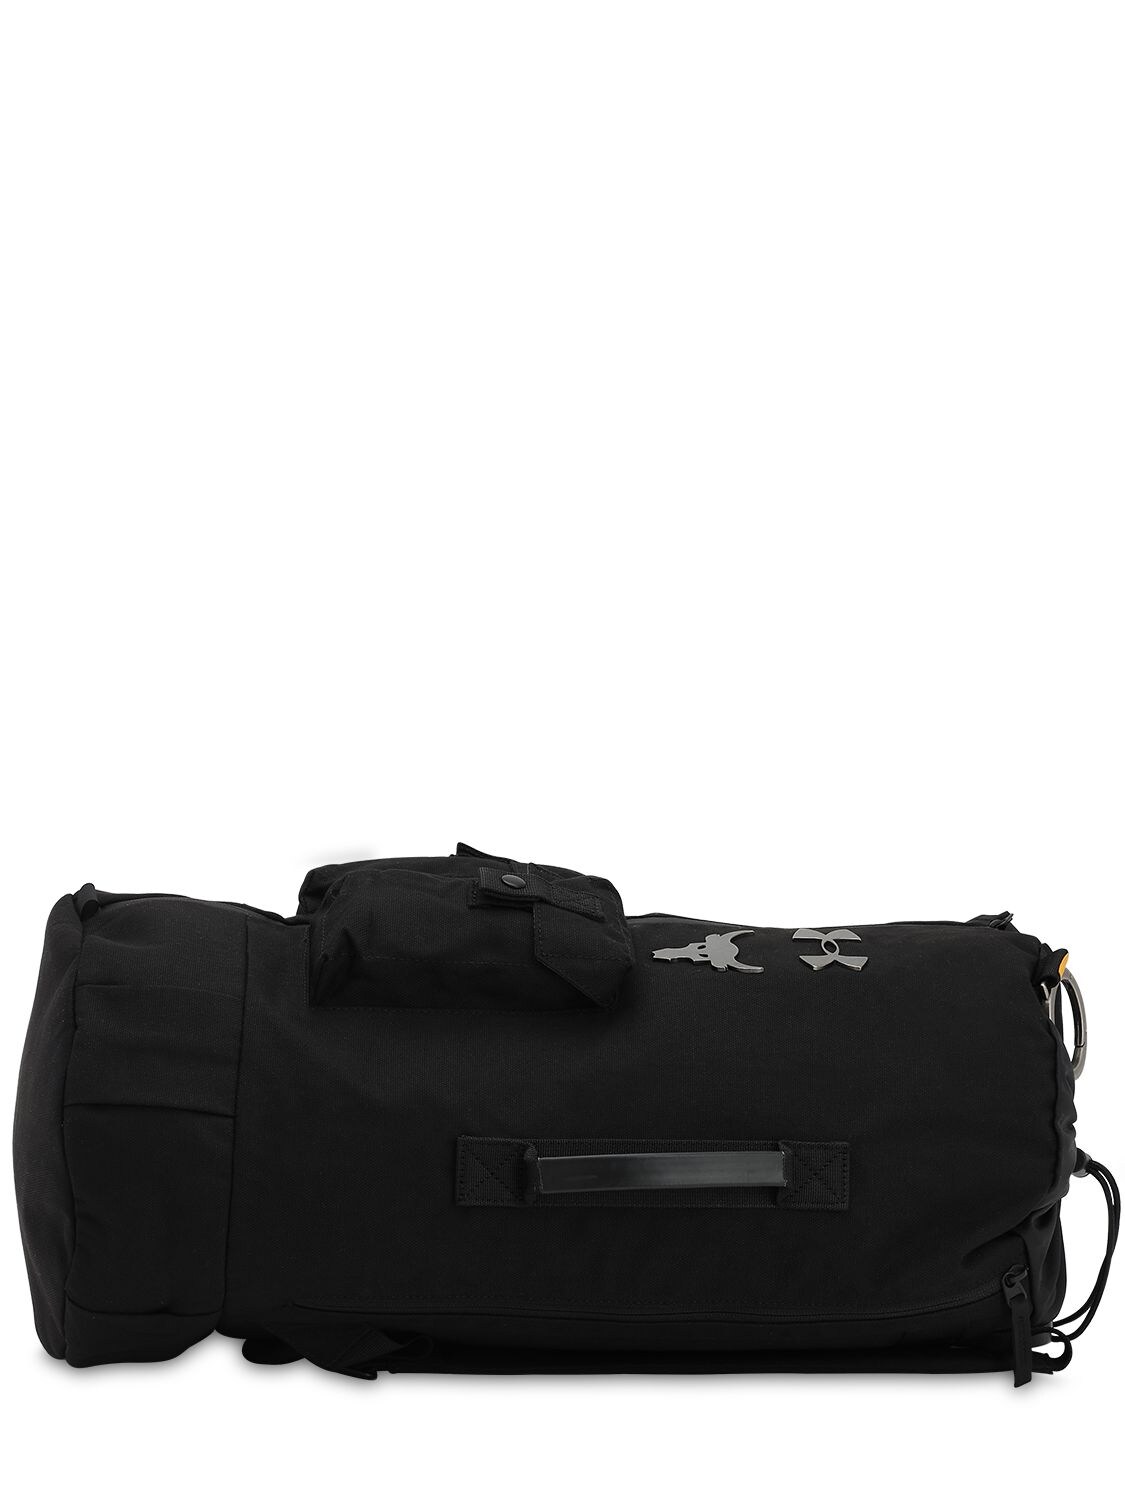 Under Armour Project Rock 40 Techno Gym Bag In Black